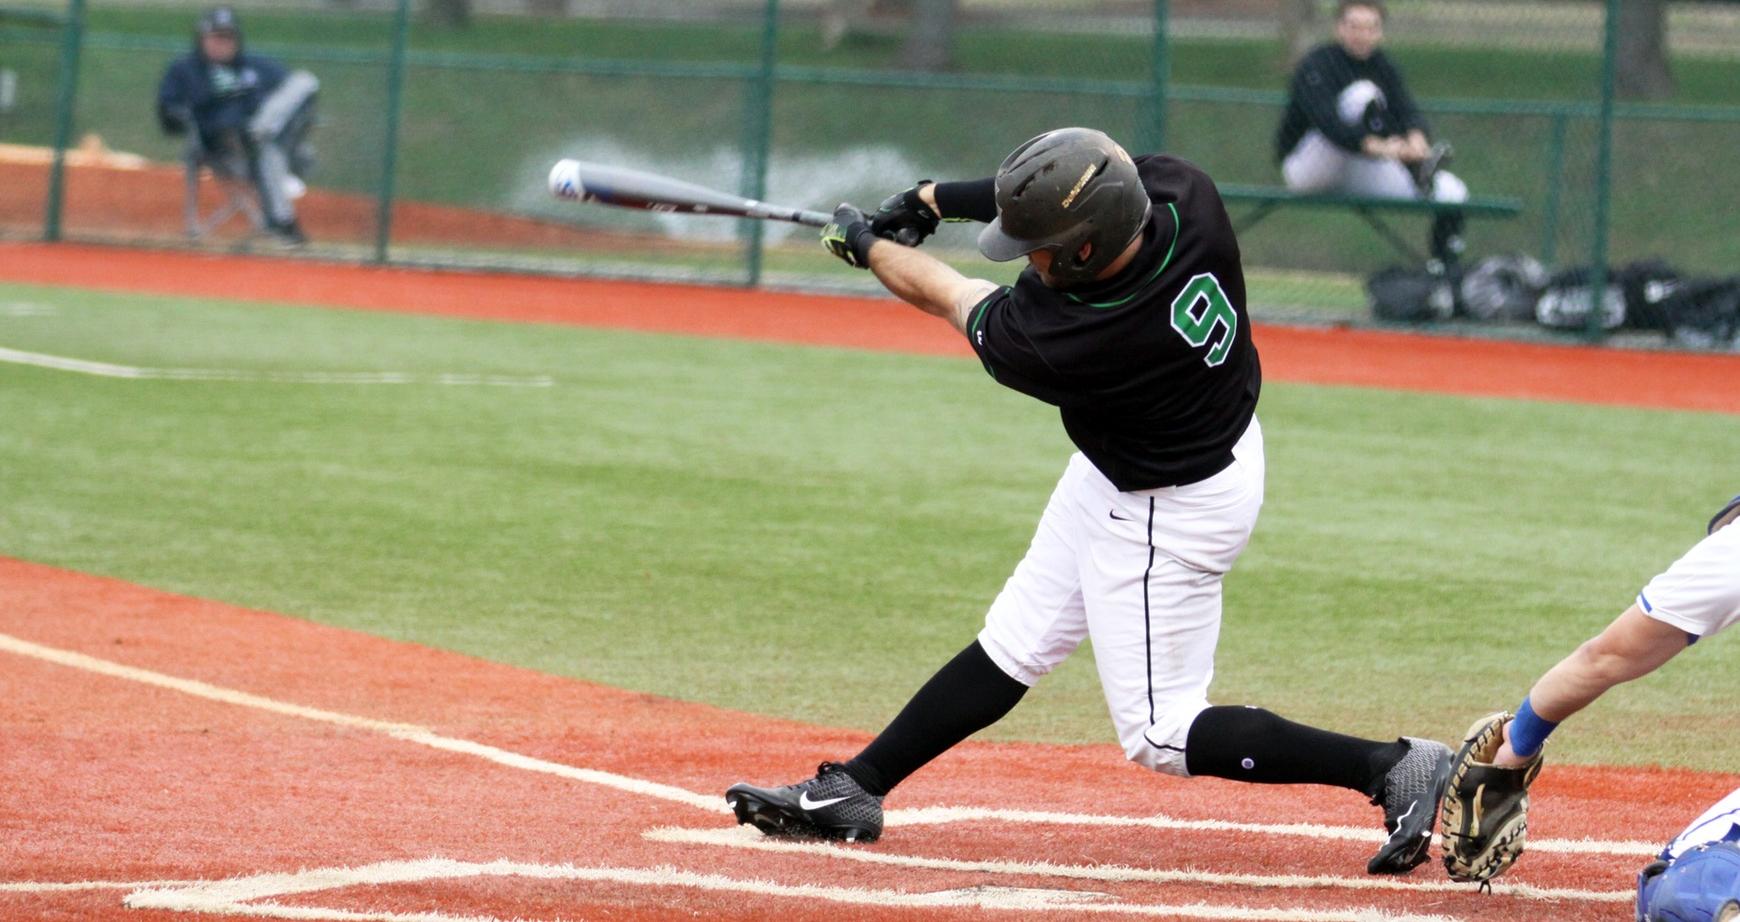 Copyright 2019; Wilmington University. All rights reserved. File photo of Julian Kurych who had three doubles and three RBI against Stonehill. Photo by Dan Lauletta. February 22, 2019 vs. New Haven at Myrtle Beach, S.C.